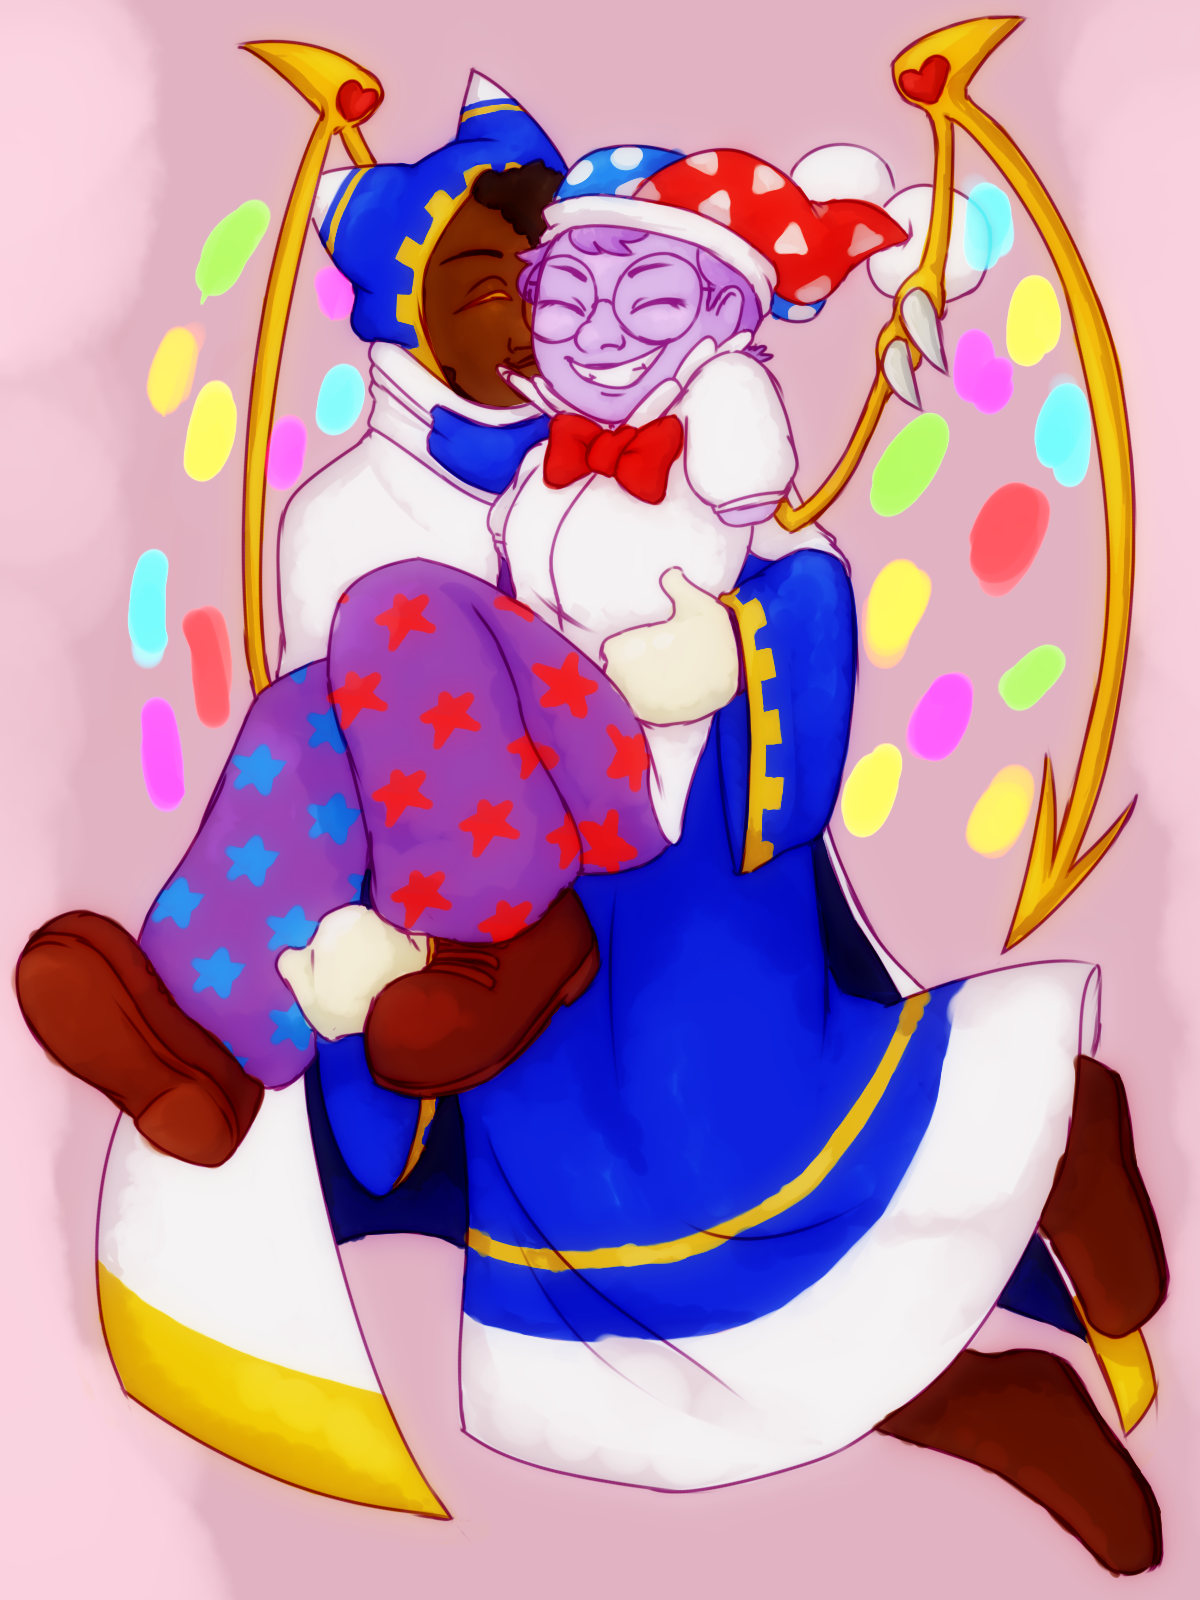 a drawing of Magolor and Marx from Kirby as humanoids (gijinkas). Magolor is holding Marx and kissing his cheek; Marx looks giddy